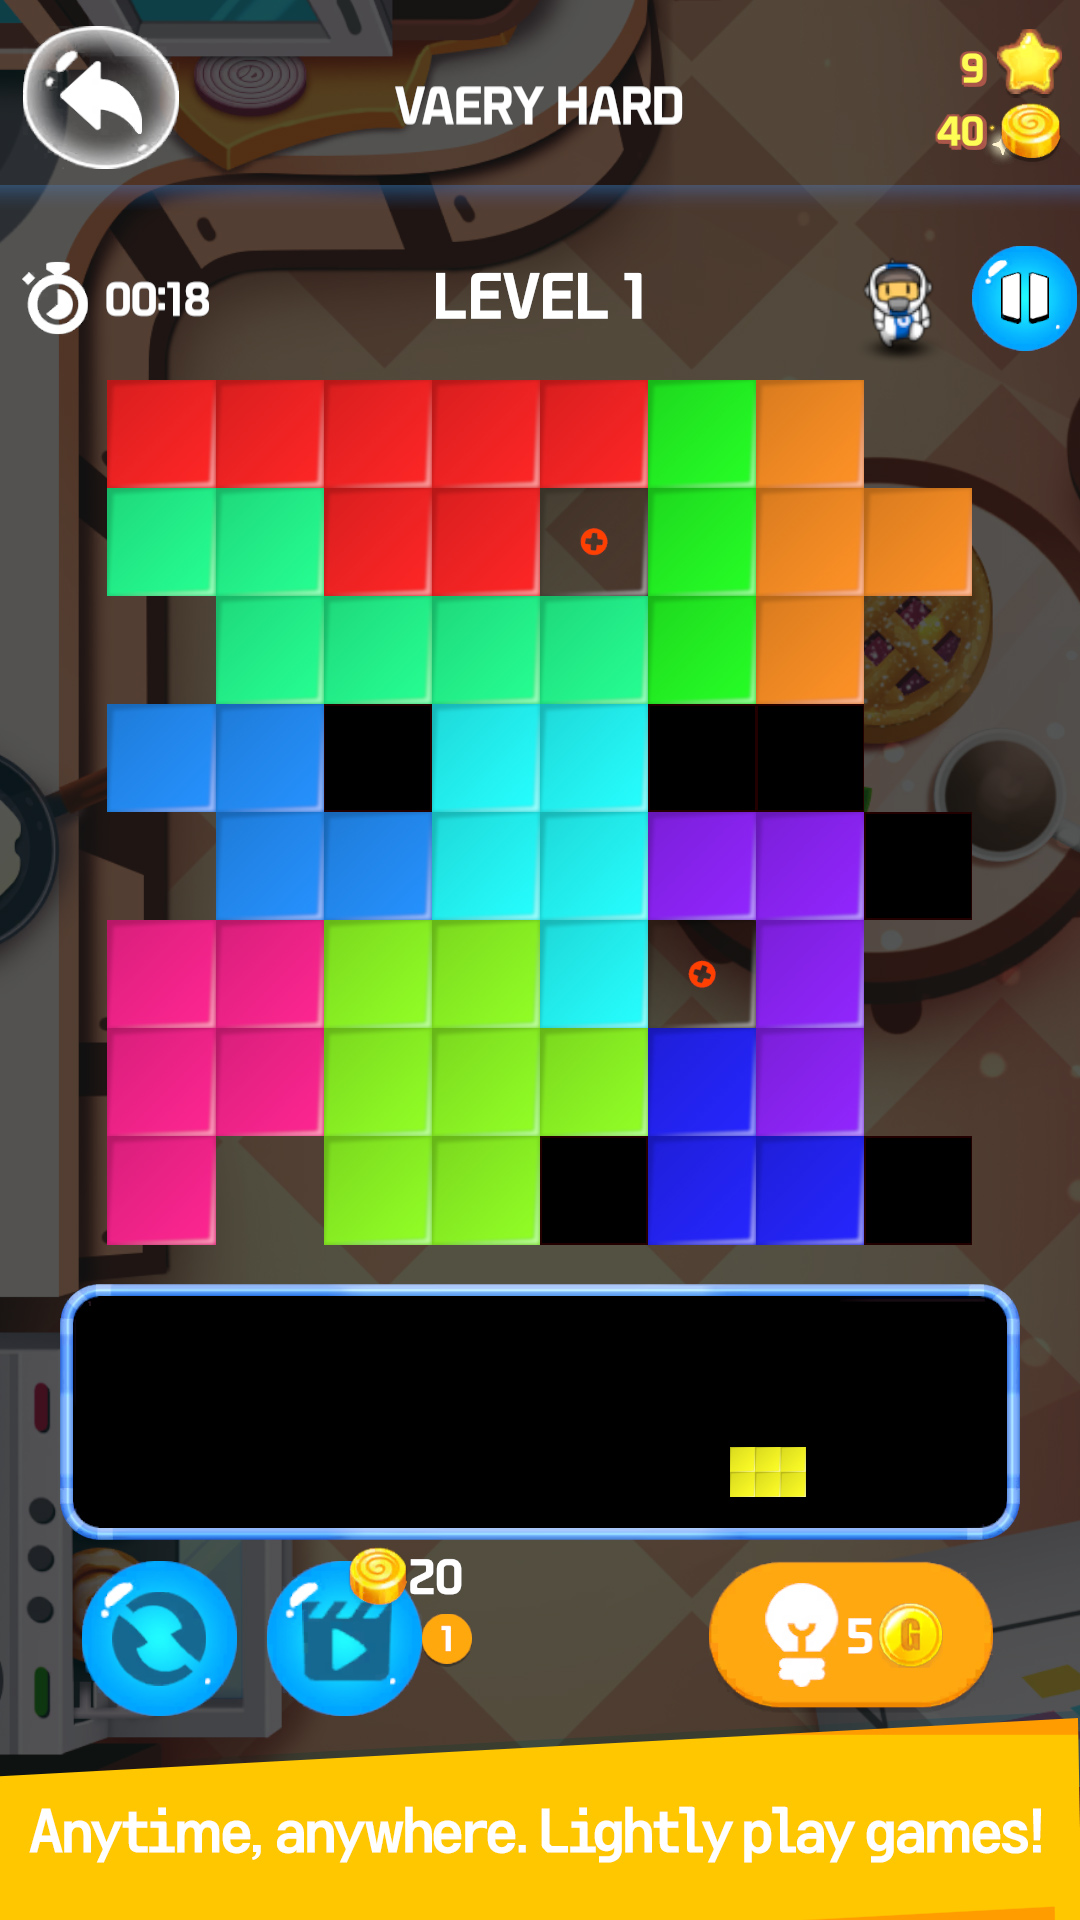 Gameplay of the Puzzle TimeAttack for Android phone or tablet.